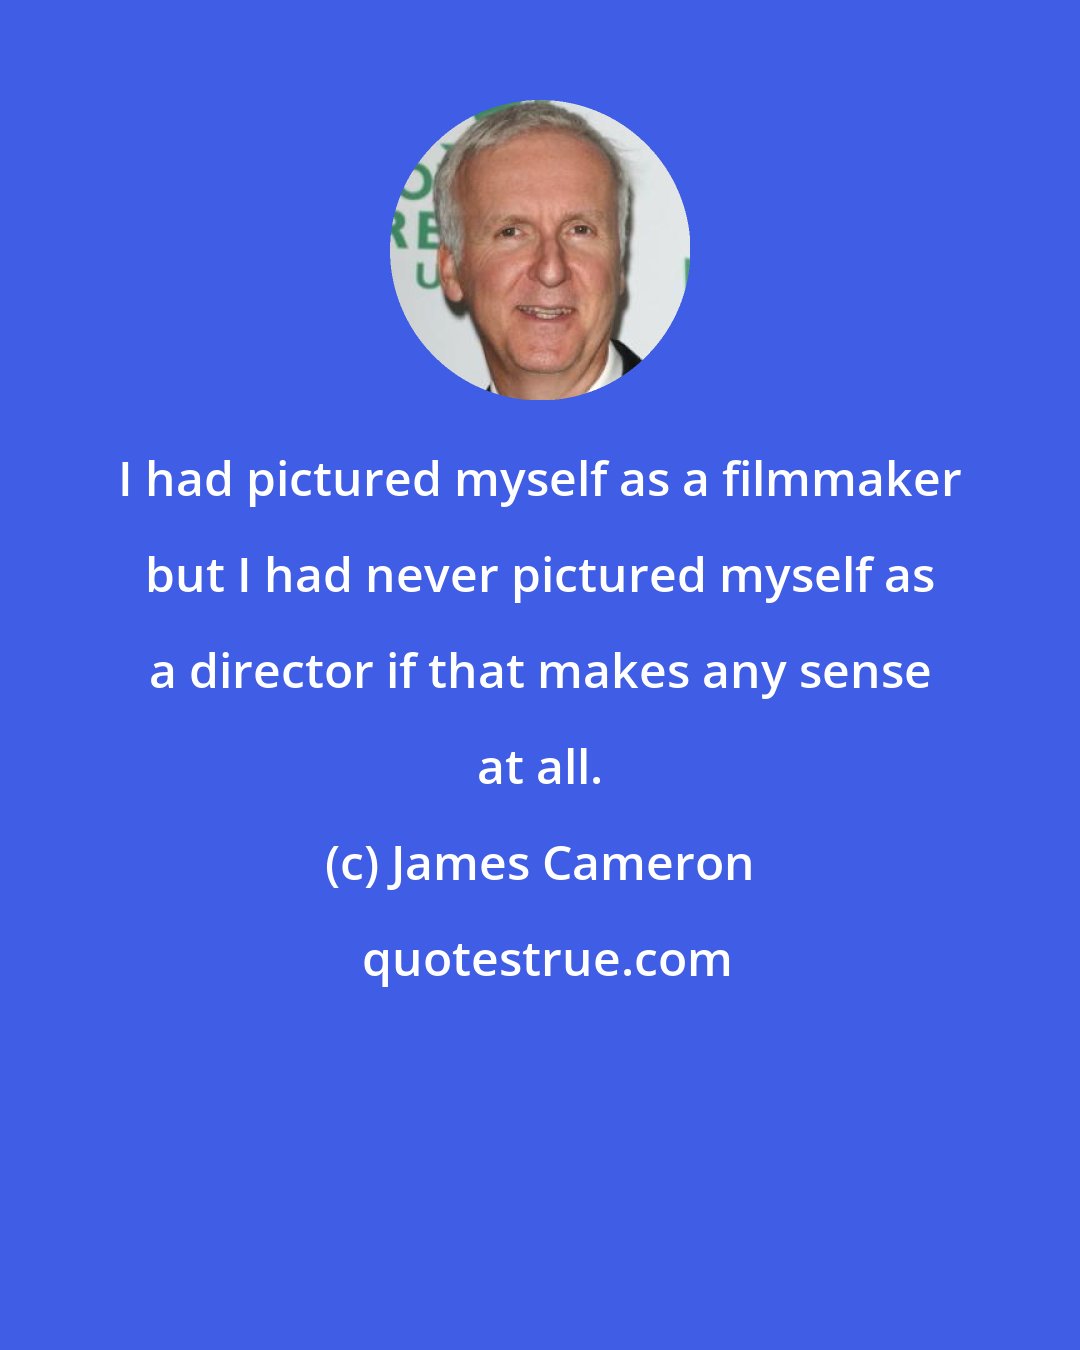 James Cameron: I had pictured myself as a filmmaker but I had never pictured myself as a director if that makes any sense at all.